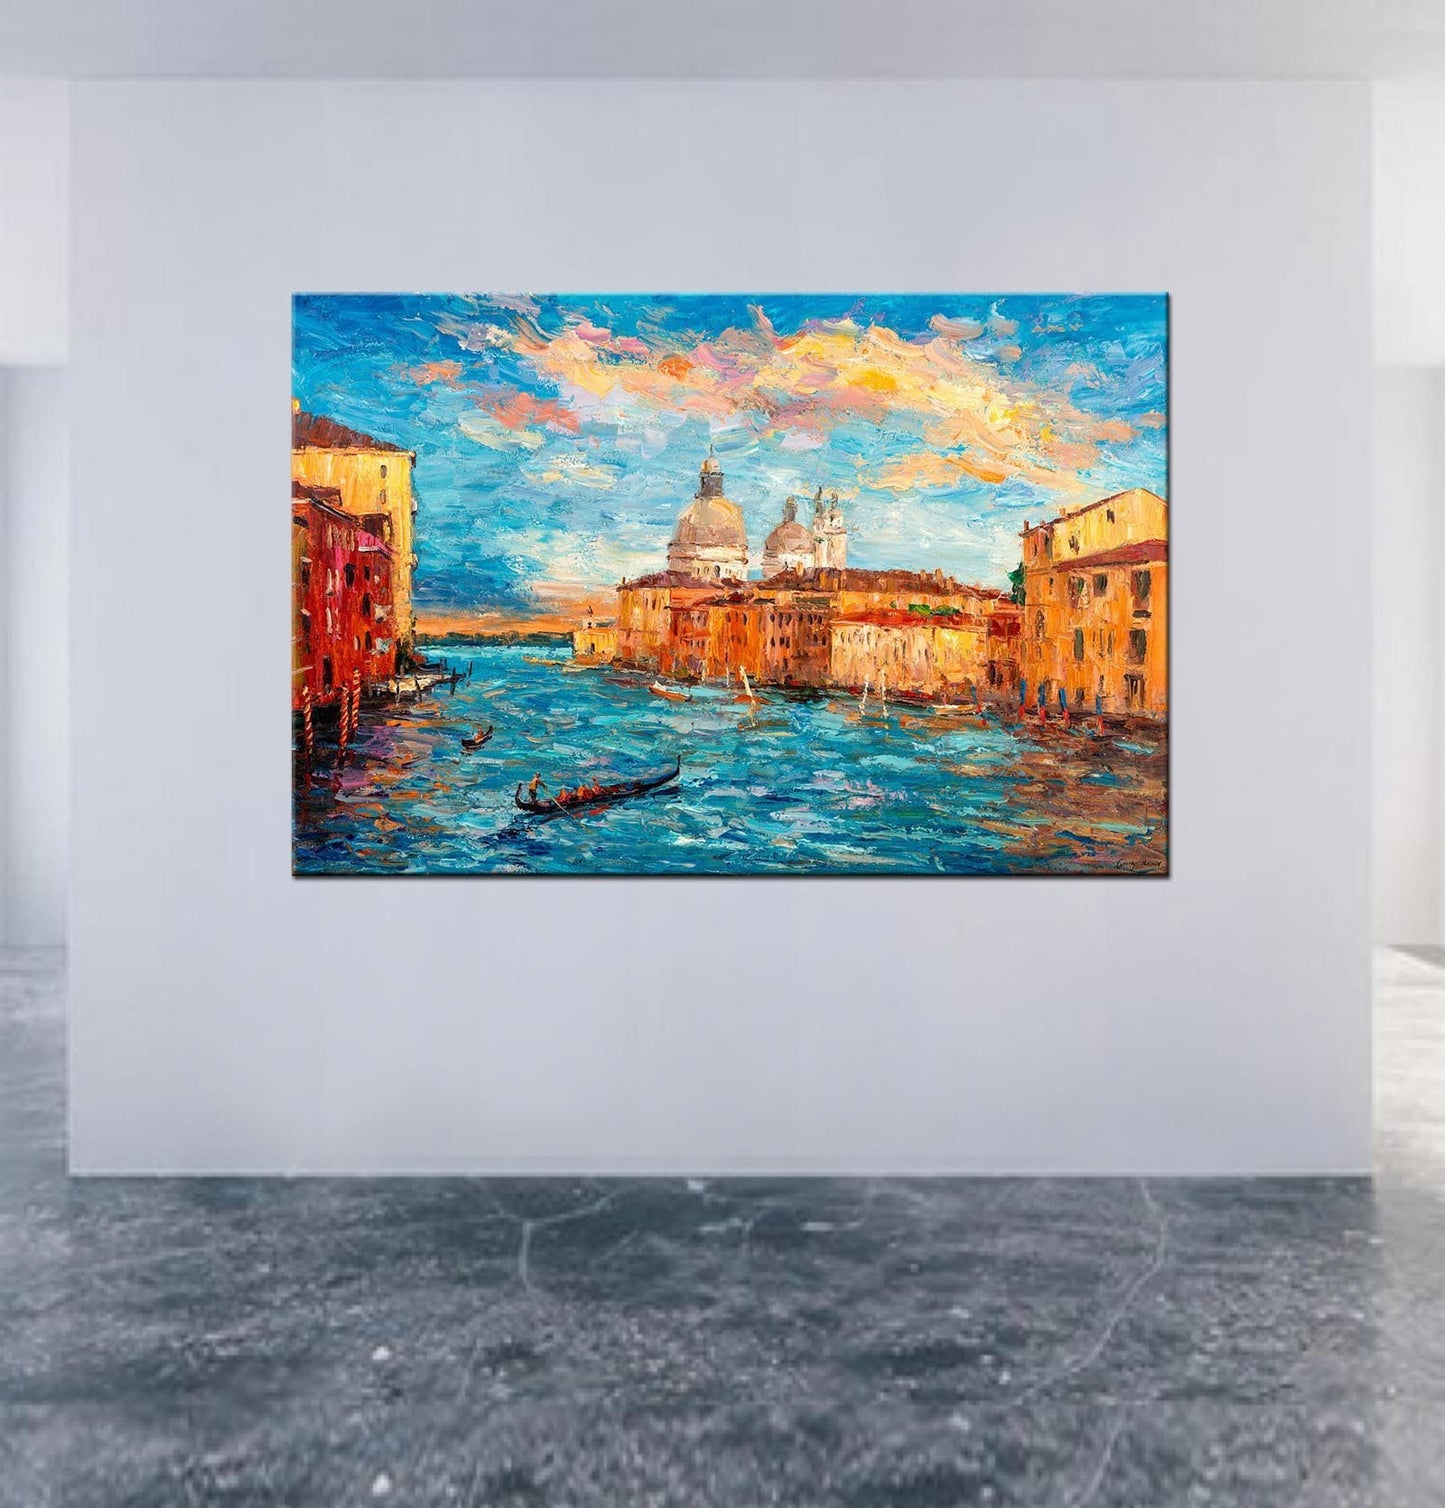 Oil Painting Gondola on the Grand Canal of Venice, Oil Painting Landscape, Abstract Canvas Painting, Large Canvas Painting, Wall Art